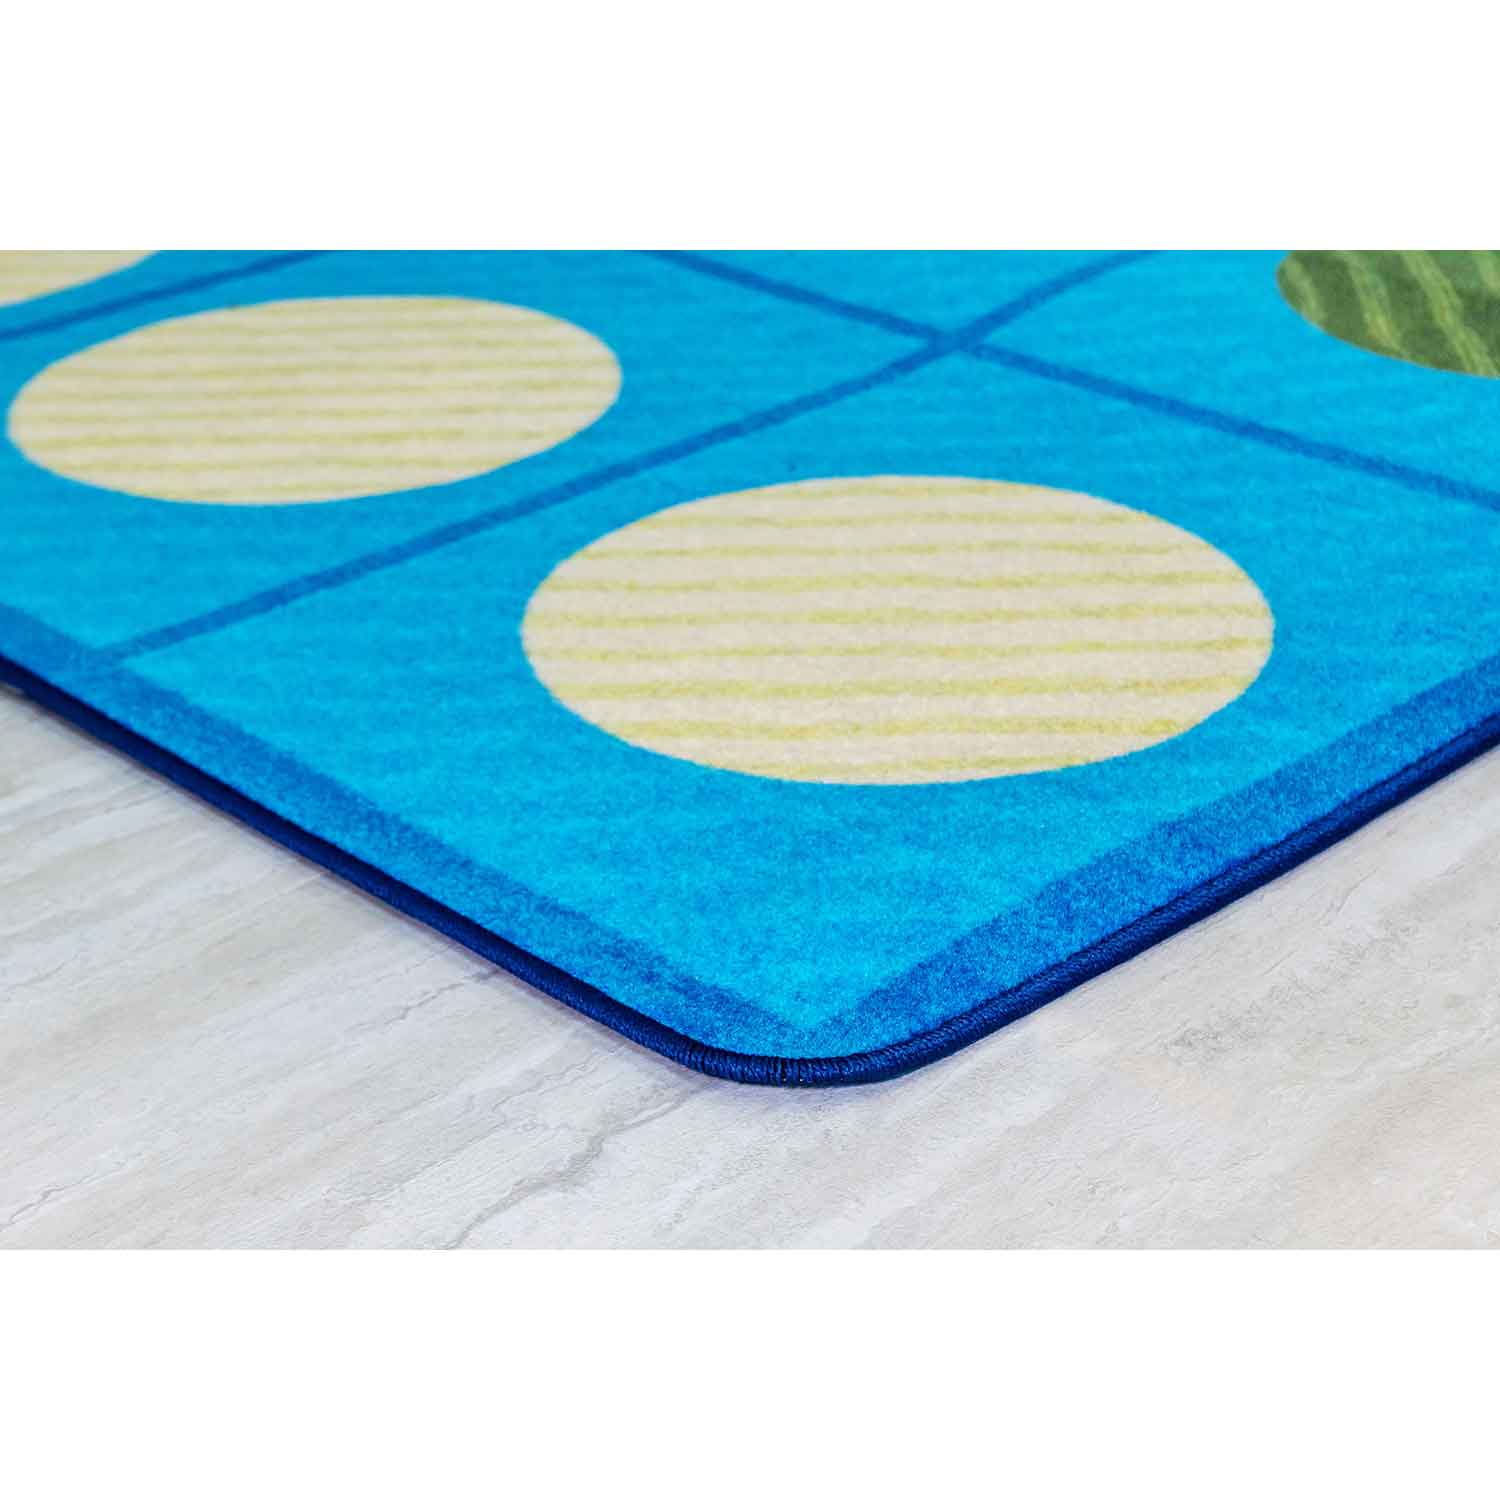 Pixel Perfect™ Calming Colors Seating Rug, Rectangle 8' x 12'